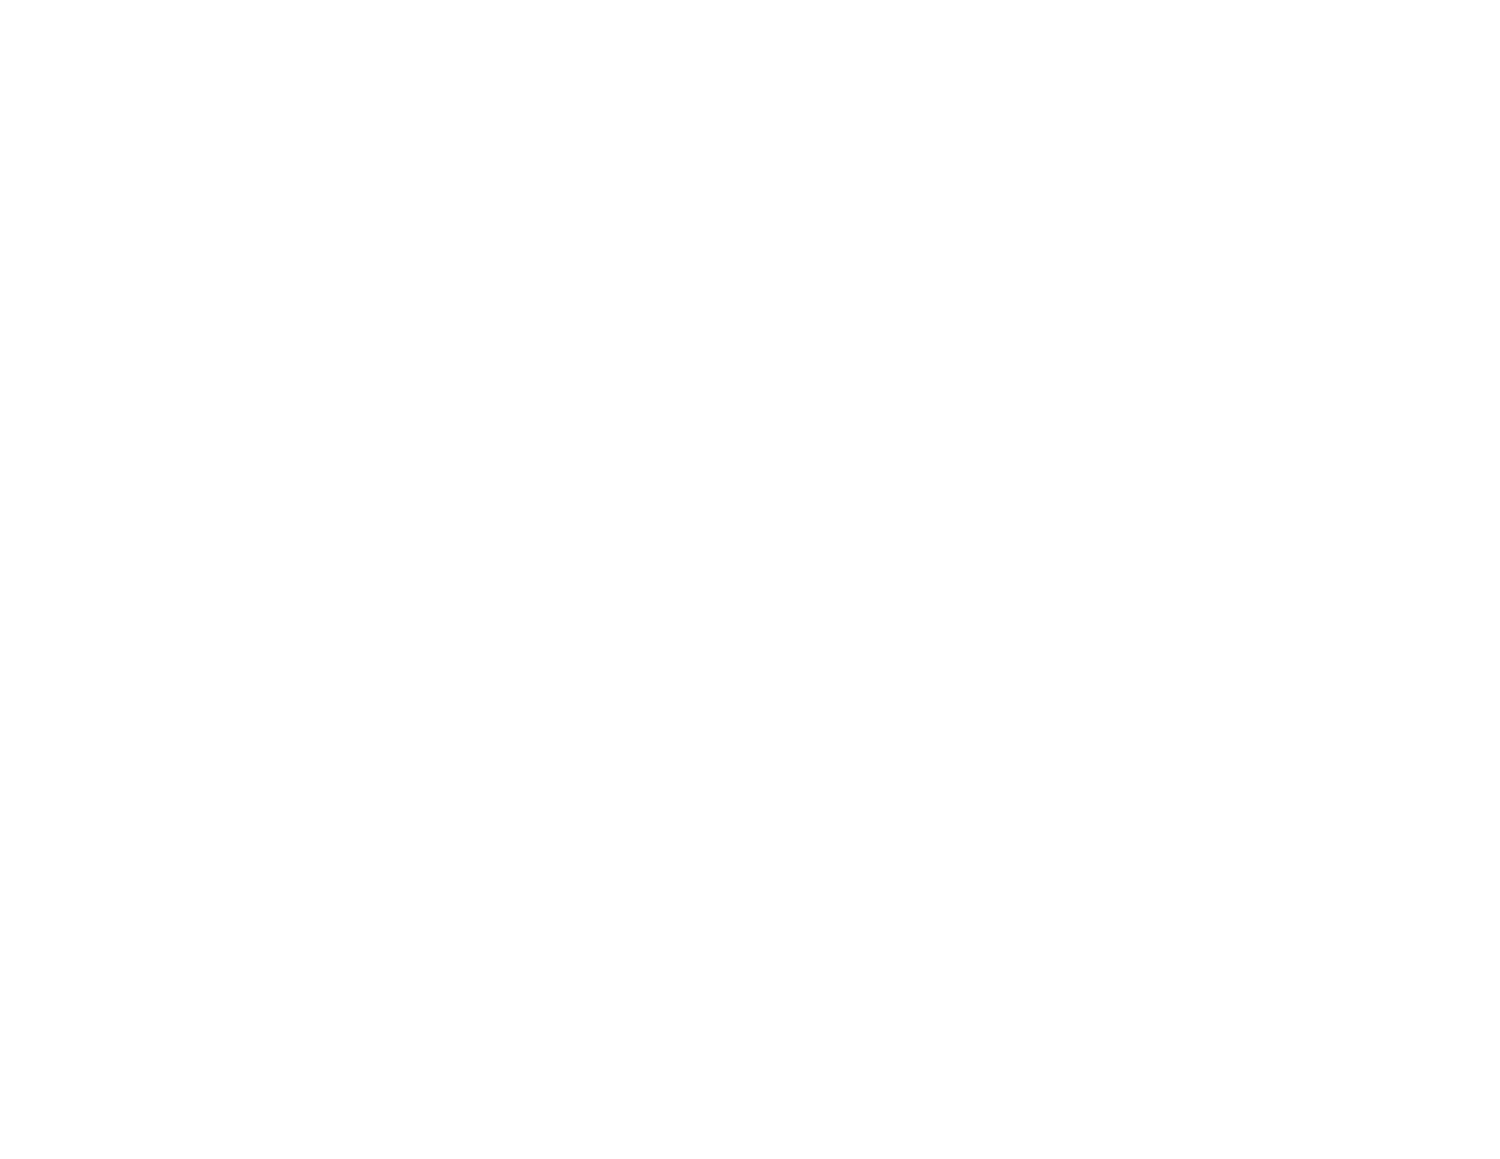 The O'Leary Therapeutic Clinic